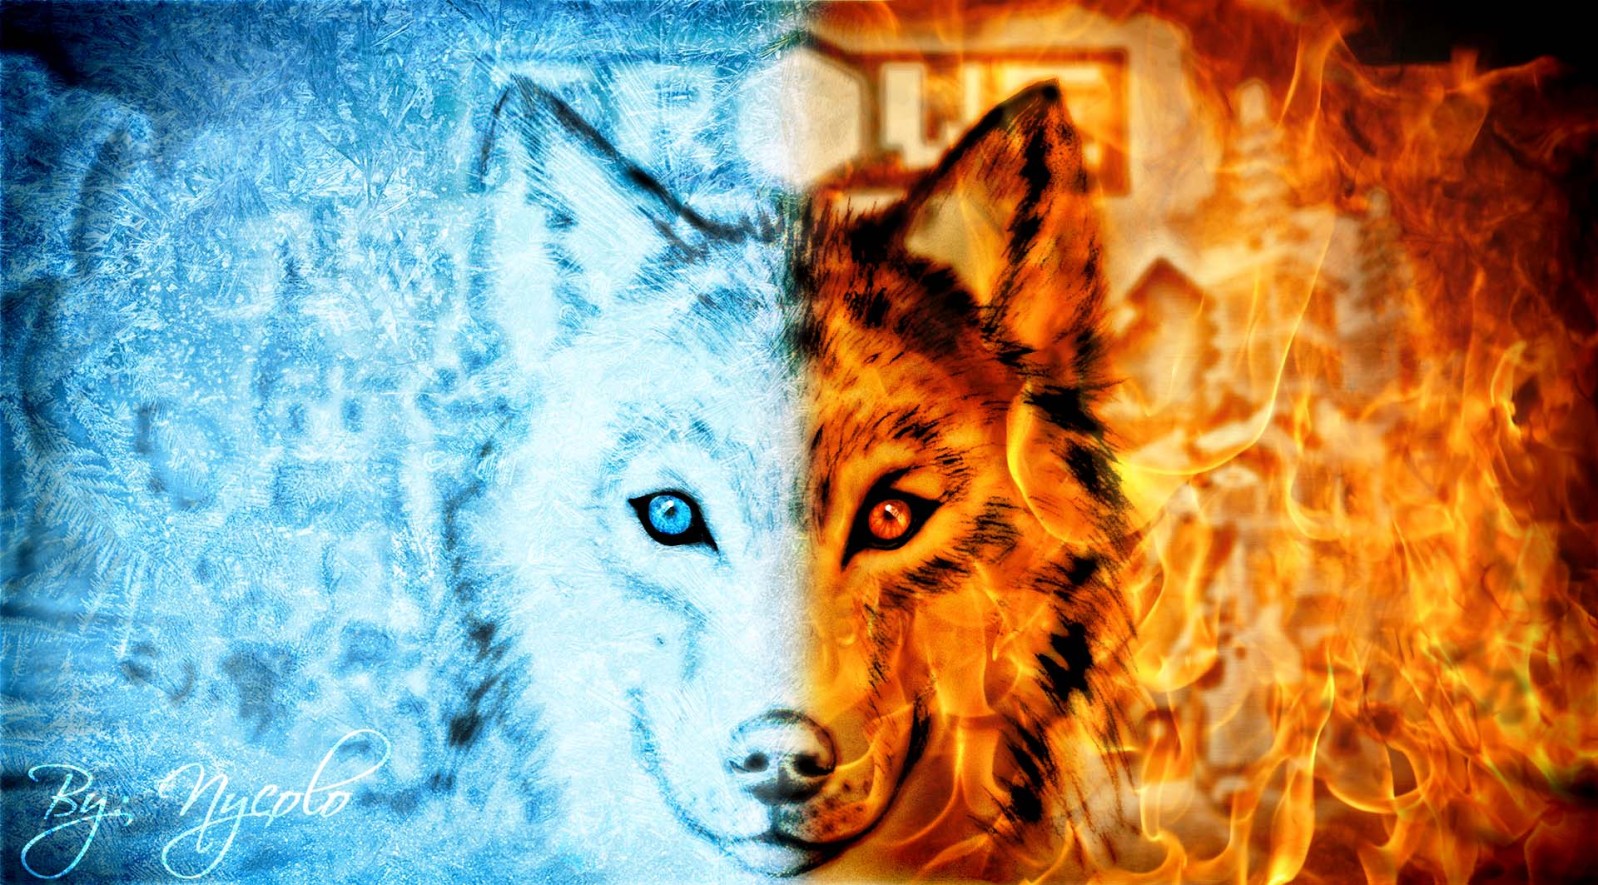 Digiwolf Ice and fire mix art - Art by Nycolo - Trovesaurus